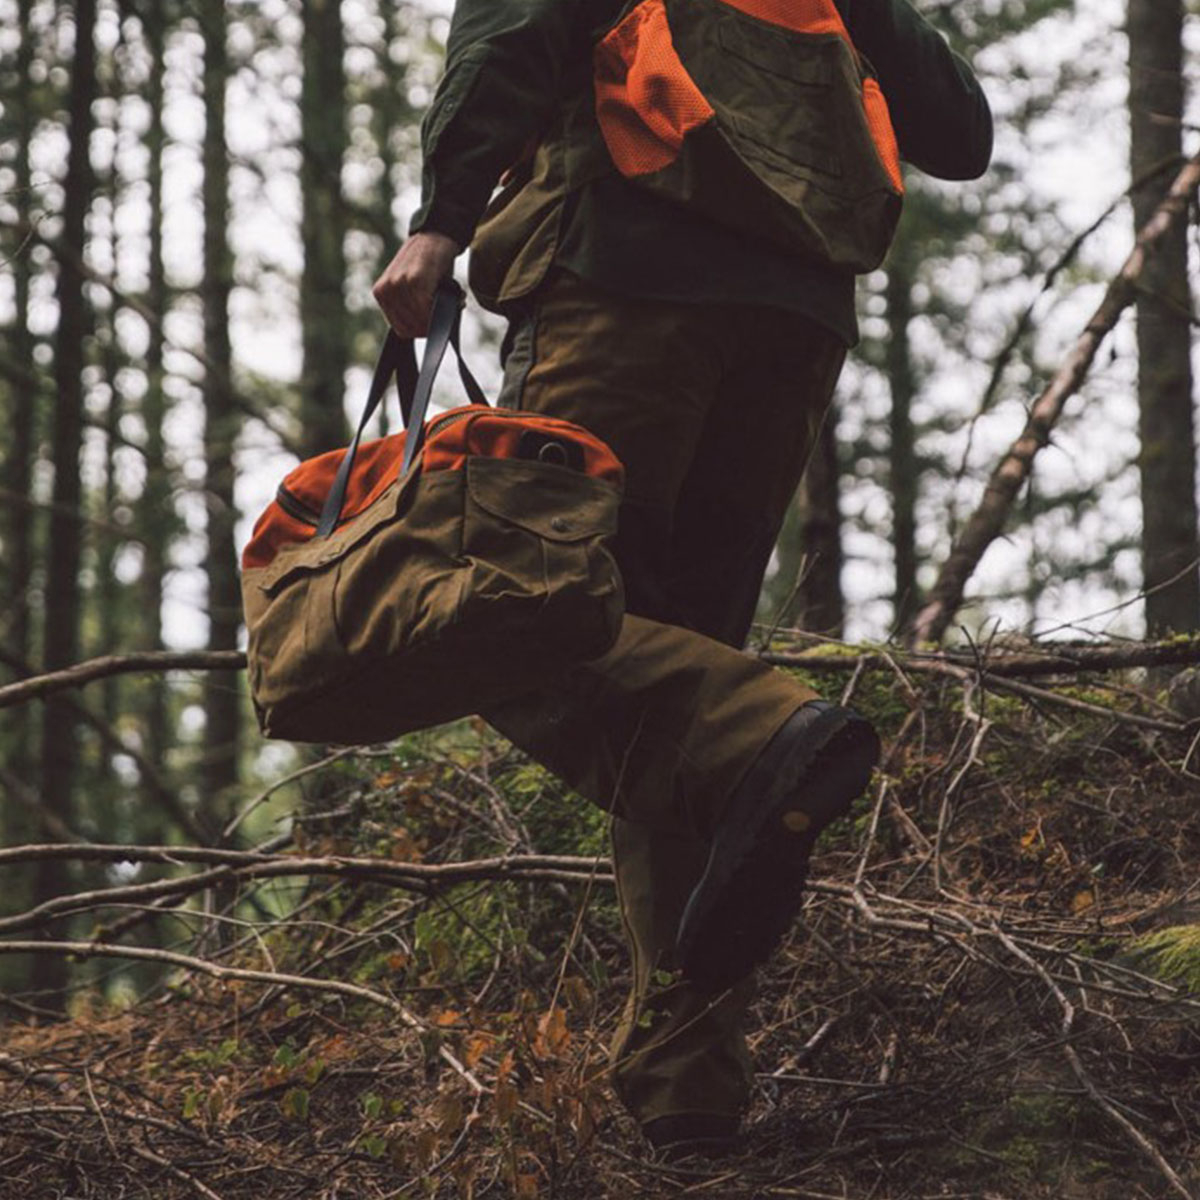 Filson Europe  The American Heritage Outerwear, Clothing, Bags & More